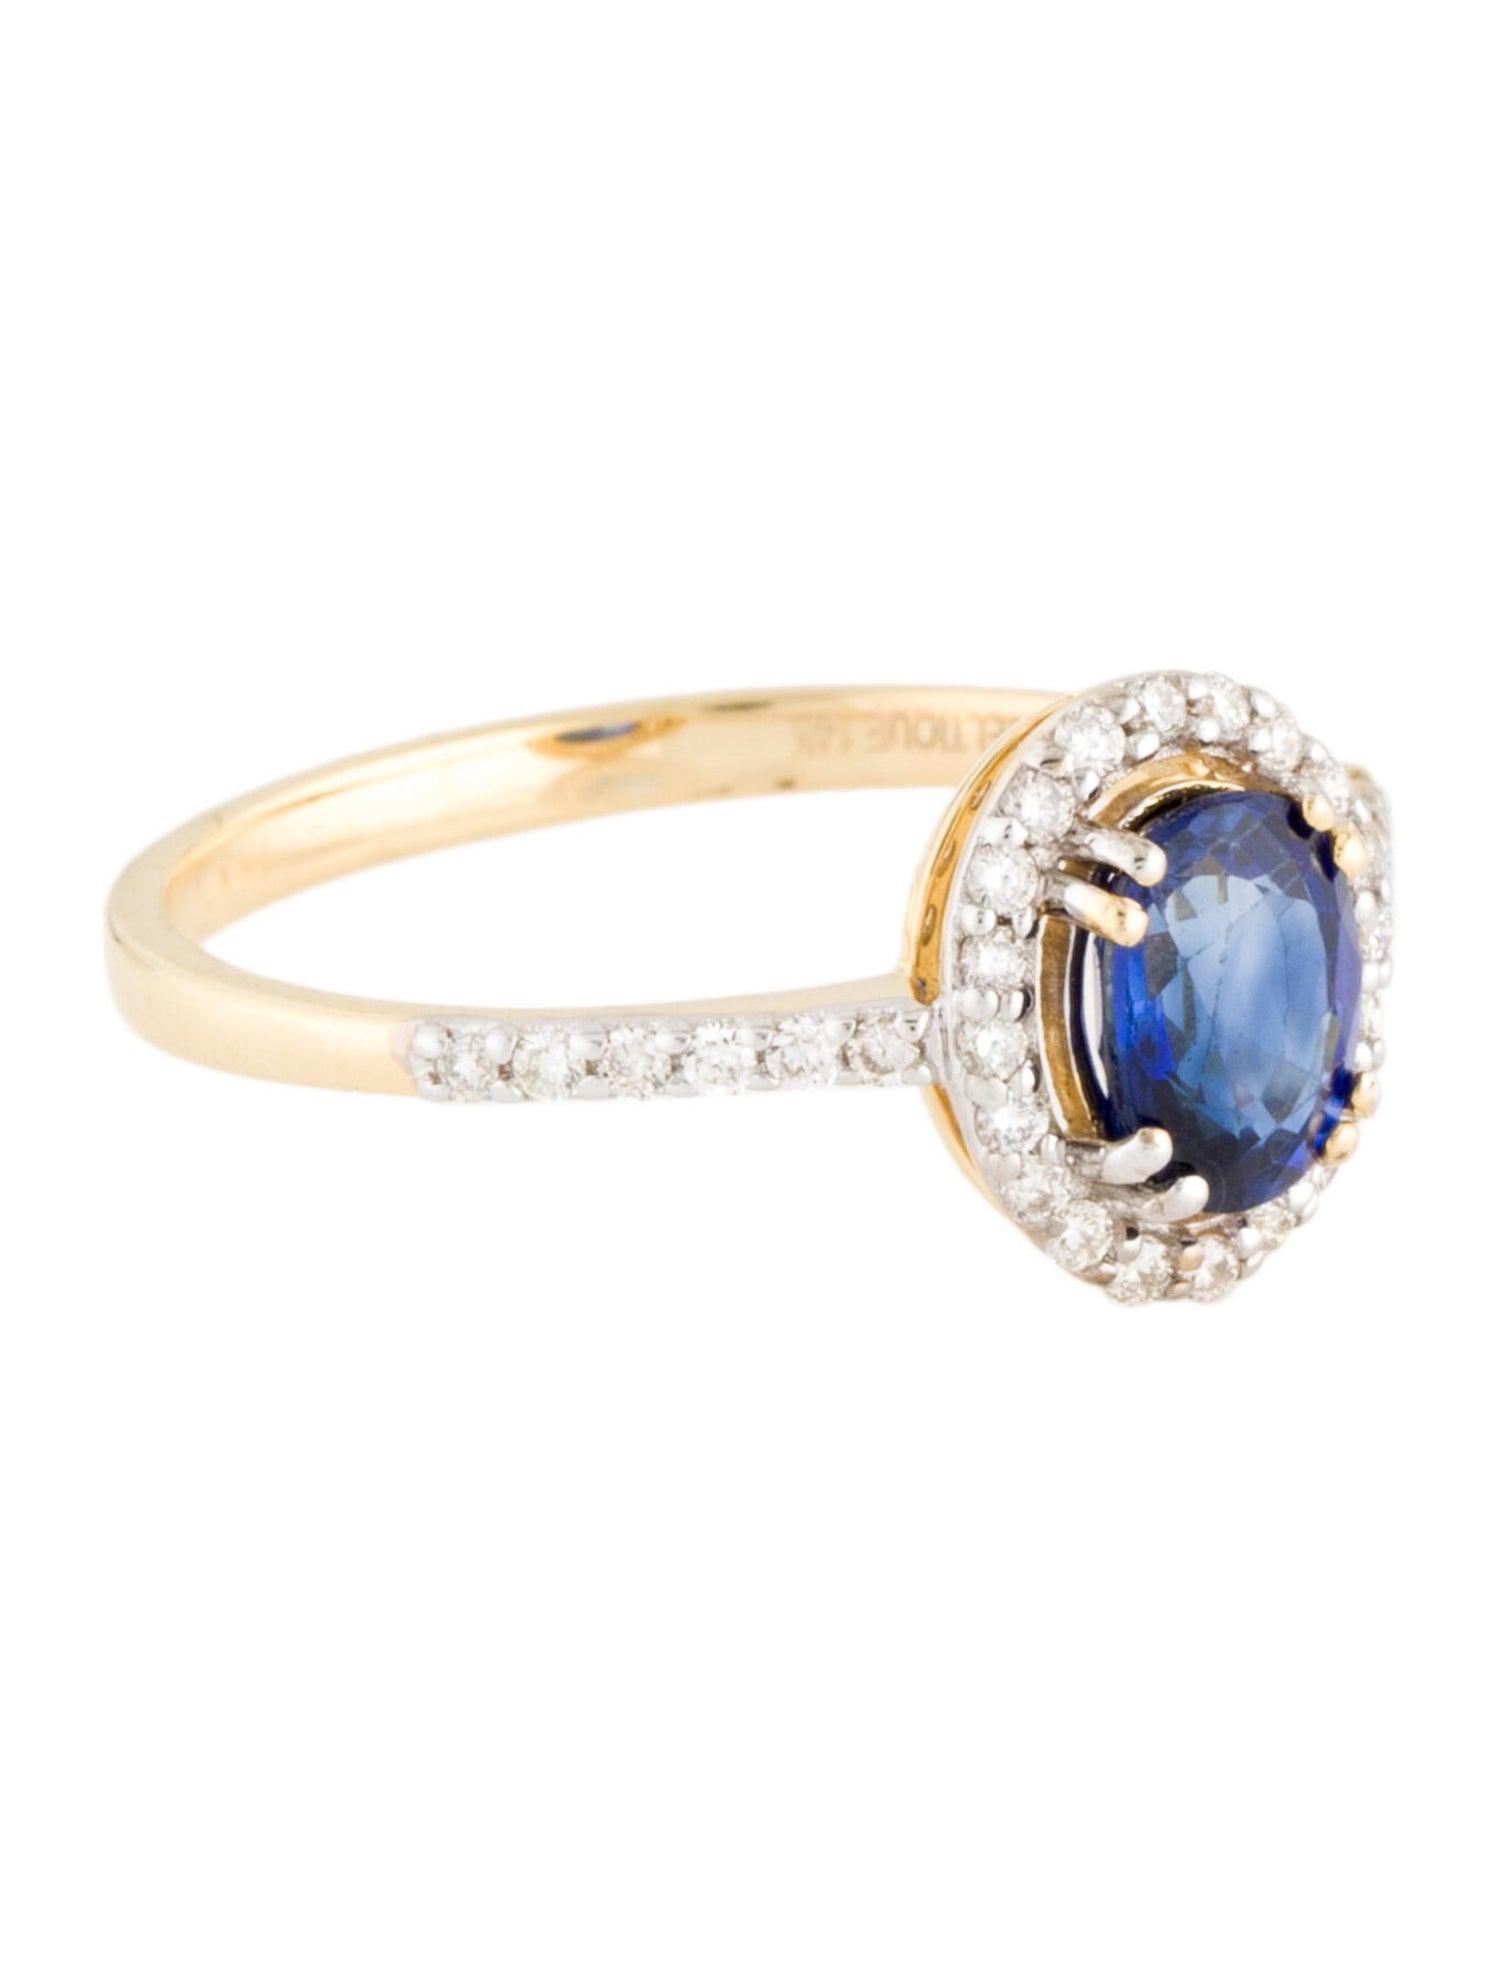 Dive into the depths of elegance with our Ocean's Majesty Sapphire and Diamond Ring from the 